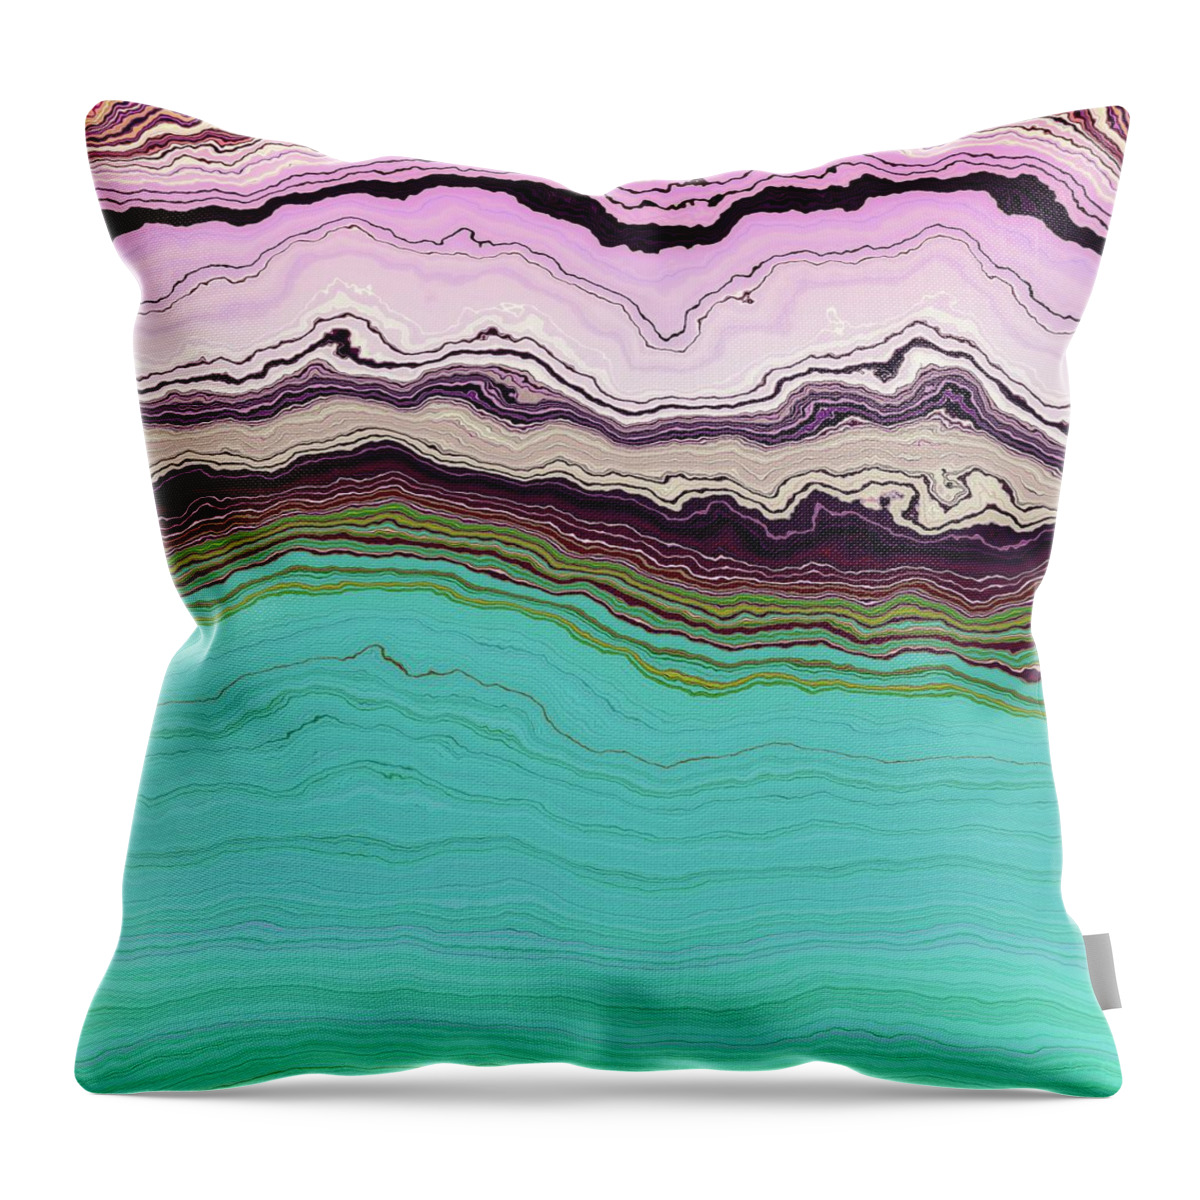 Blue Throw Pillow featuring the digital art Blue and Lavender by Matthew Lindley